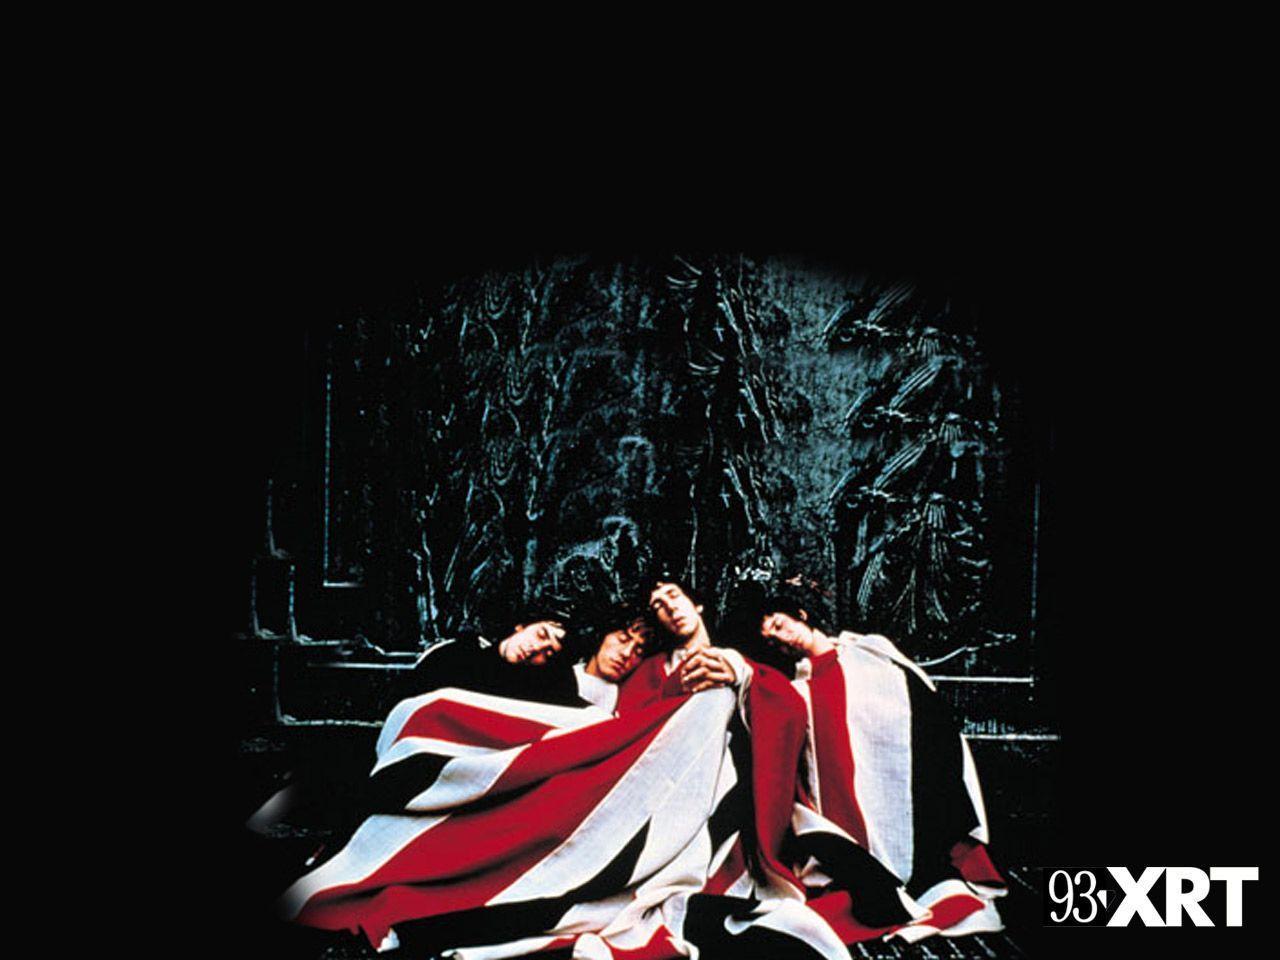 Free The Who wallpaper. The Who wallpaper